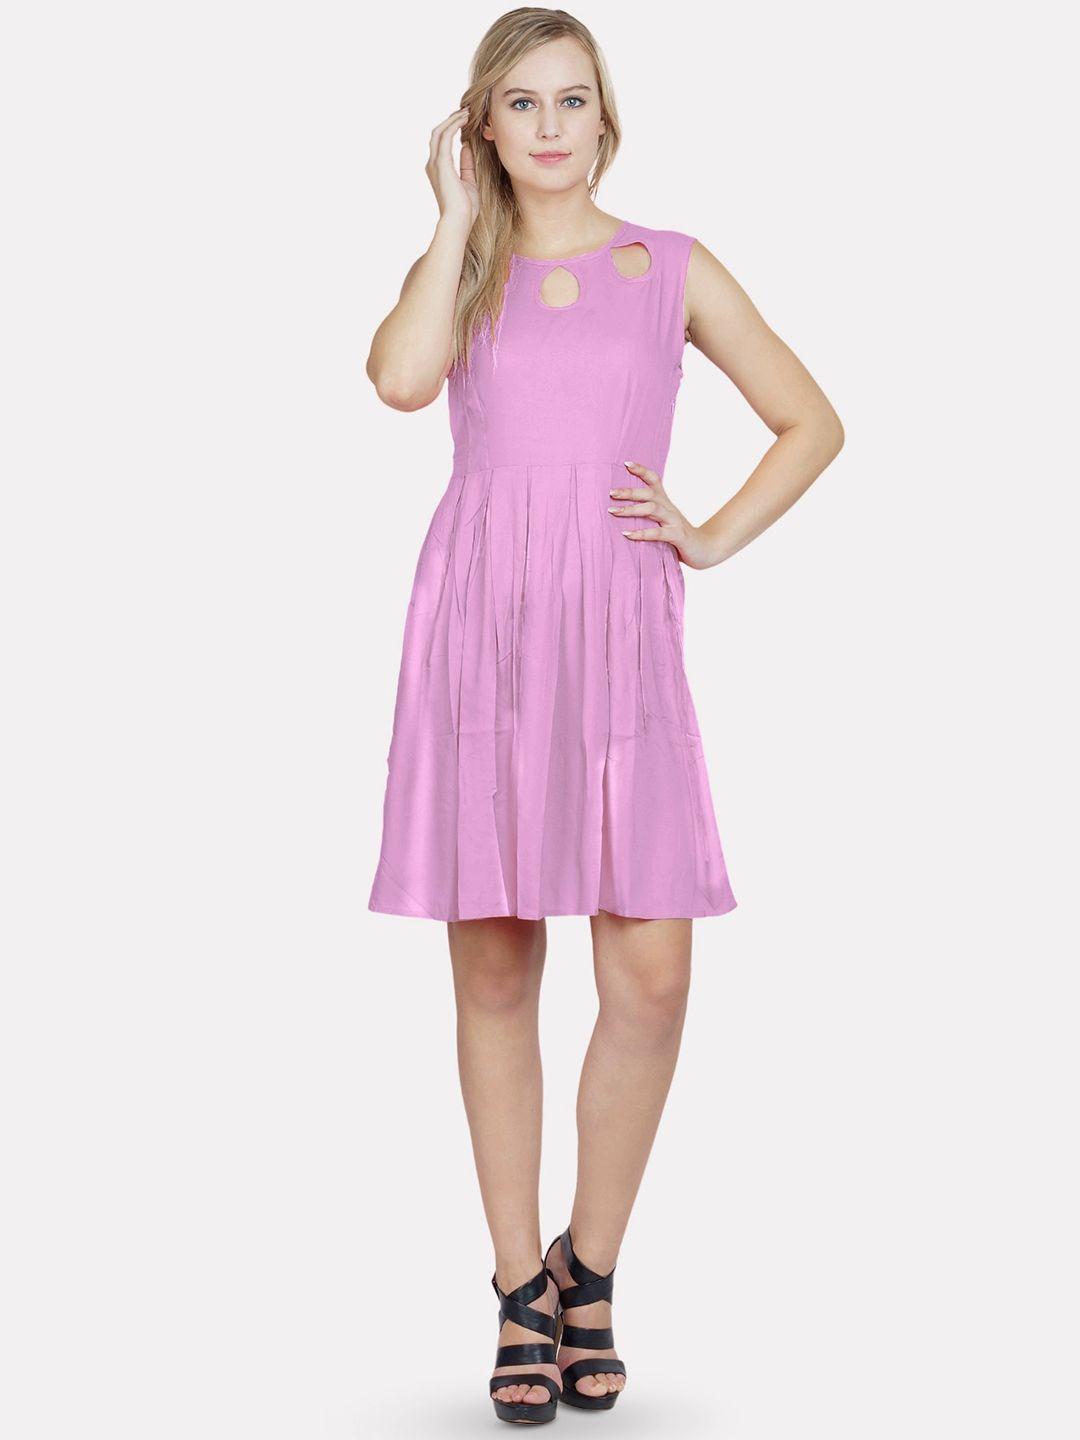 patrorna-pleated-cut-outs-detail-round-neck-sleeveless-cotton-casual-fit-&-flare-dress